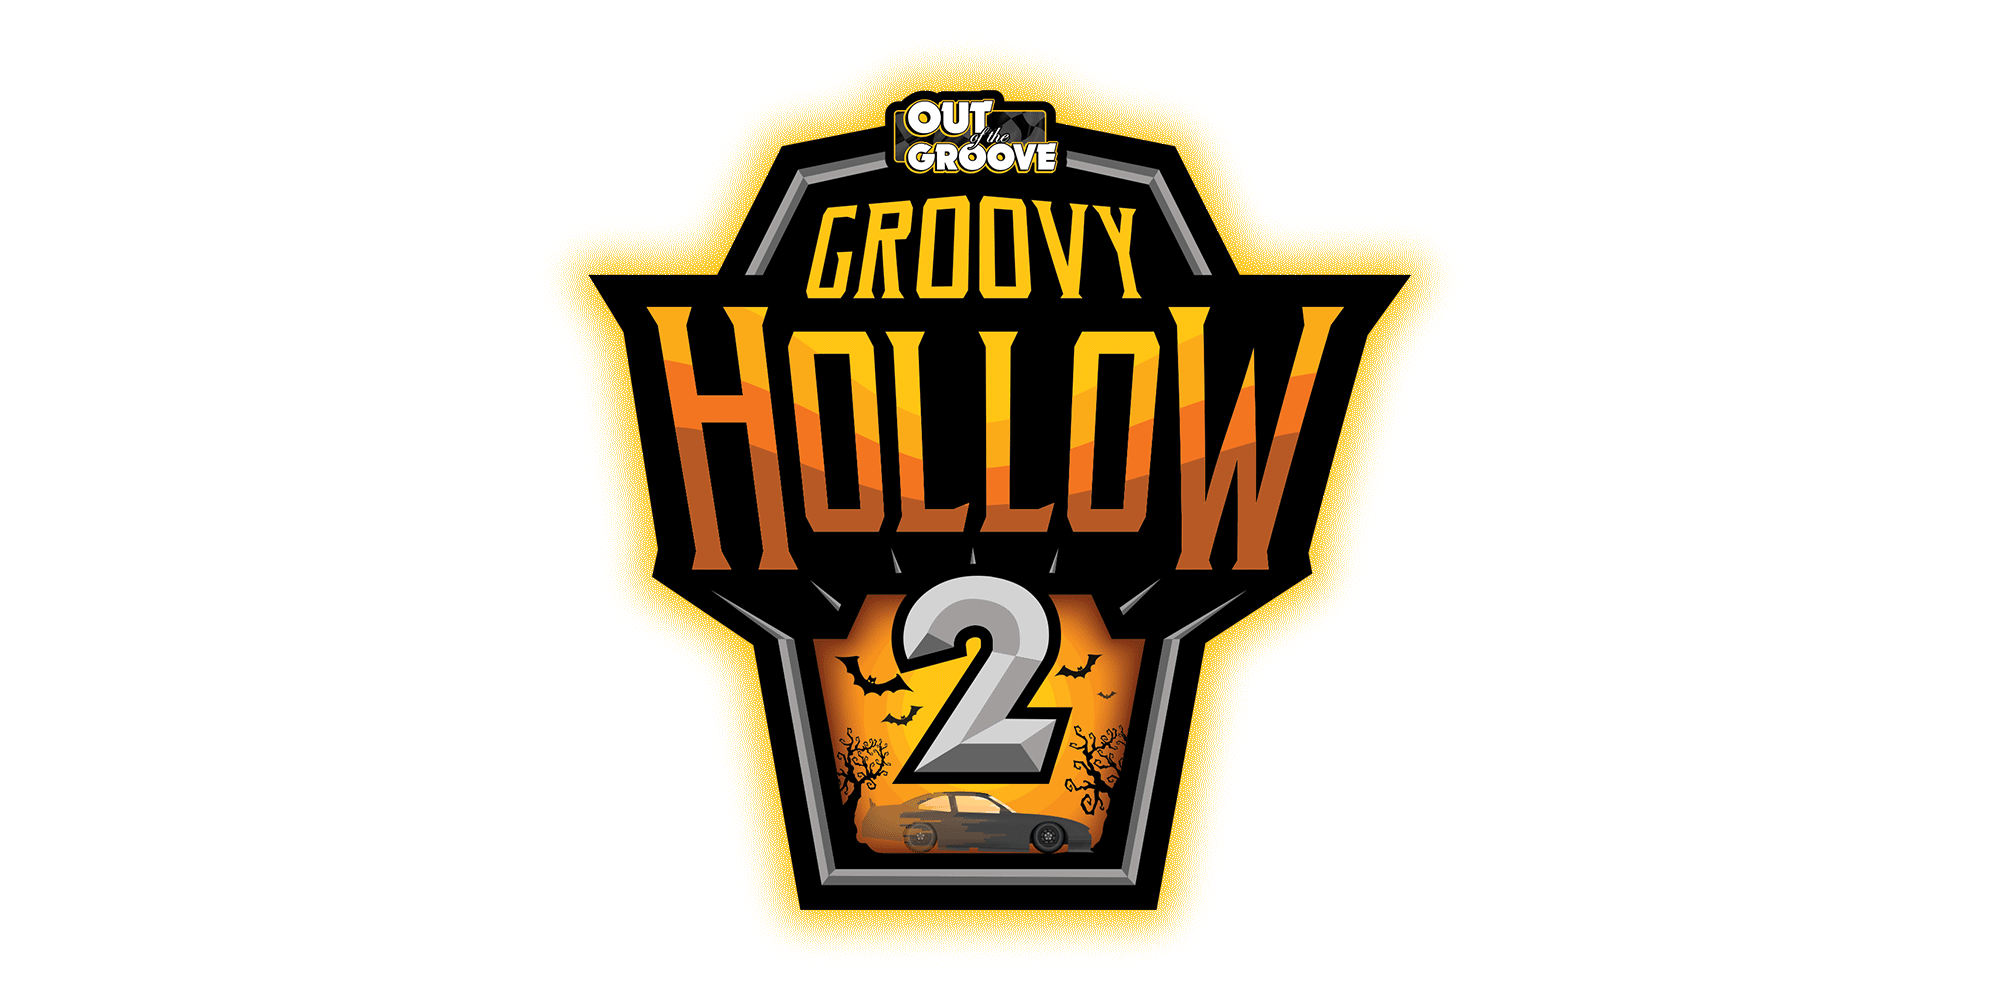 Out of the Groove Groovy Hollow 2 logo Eric Estepp